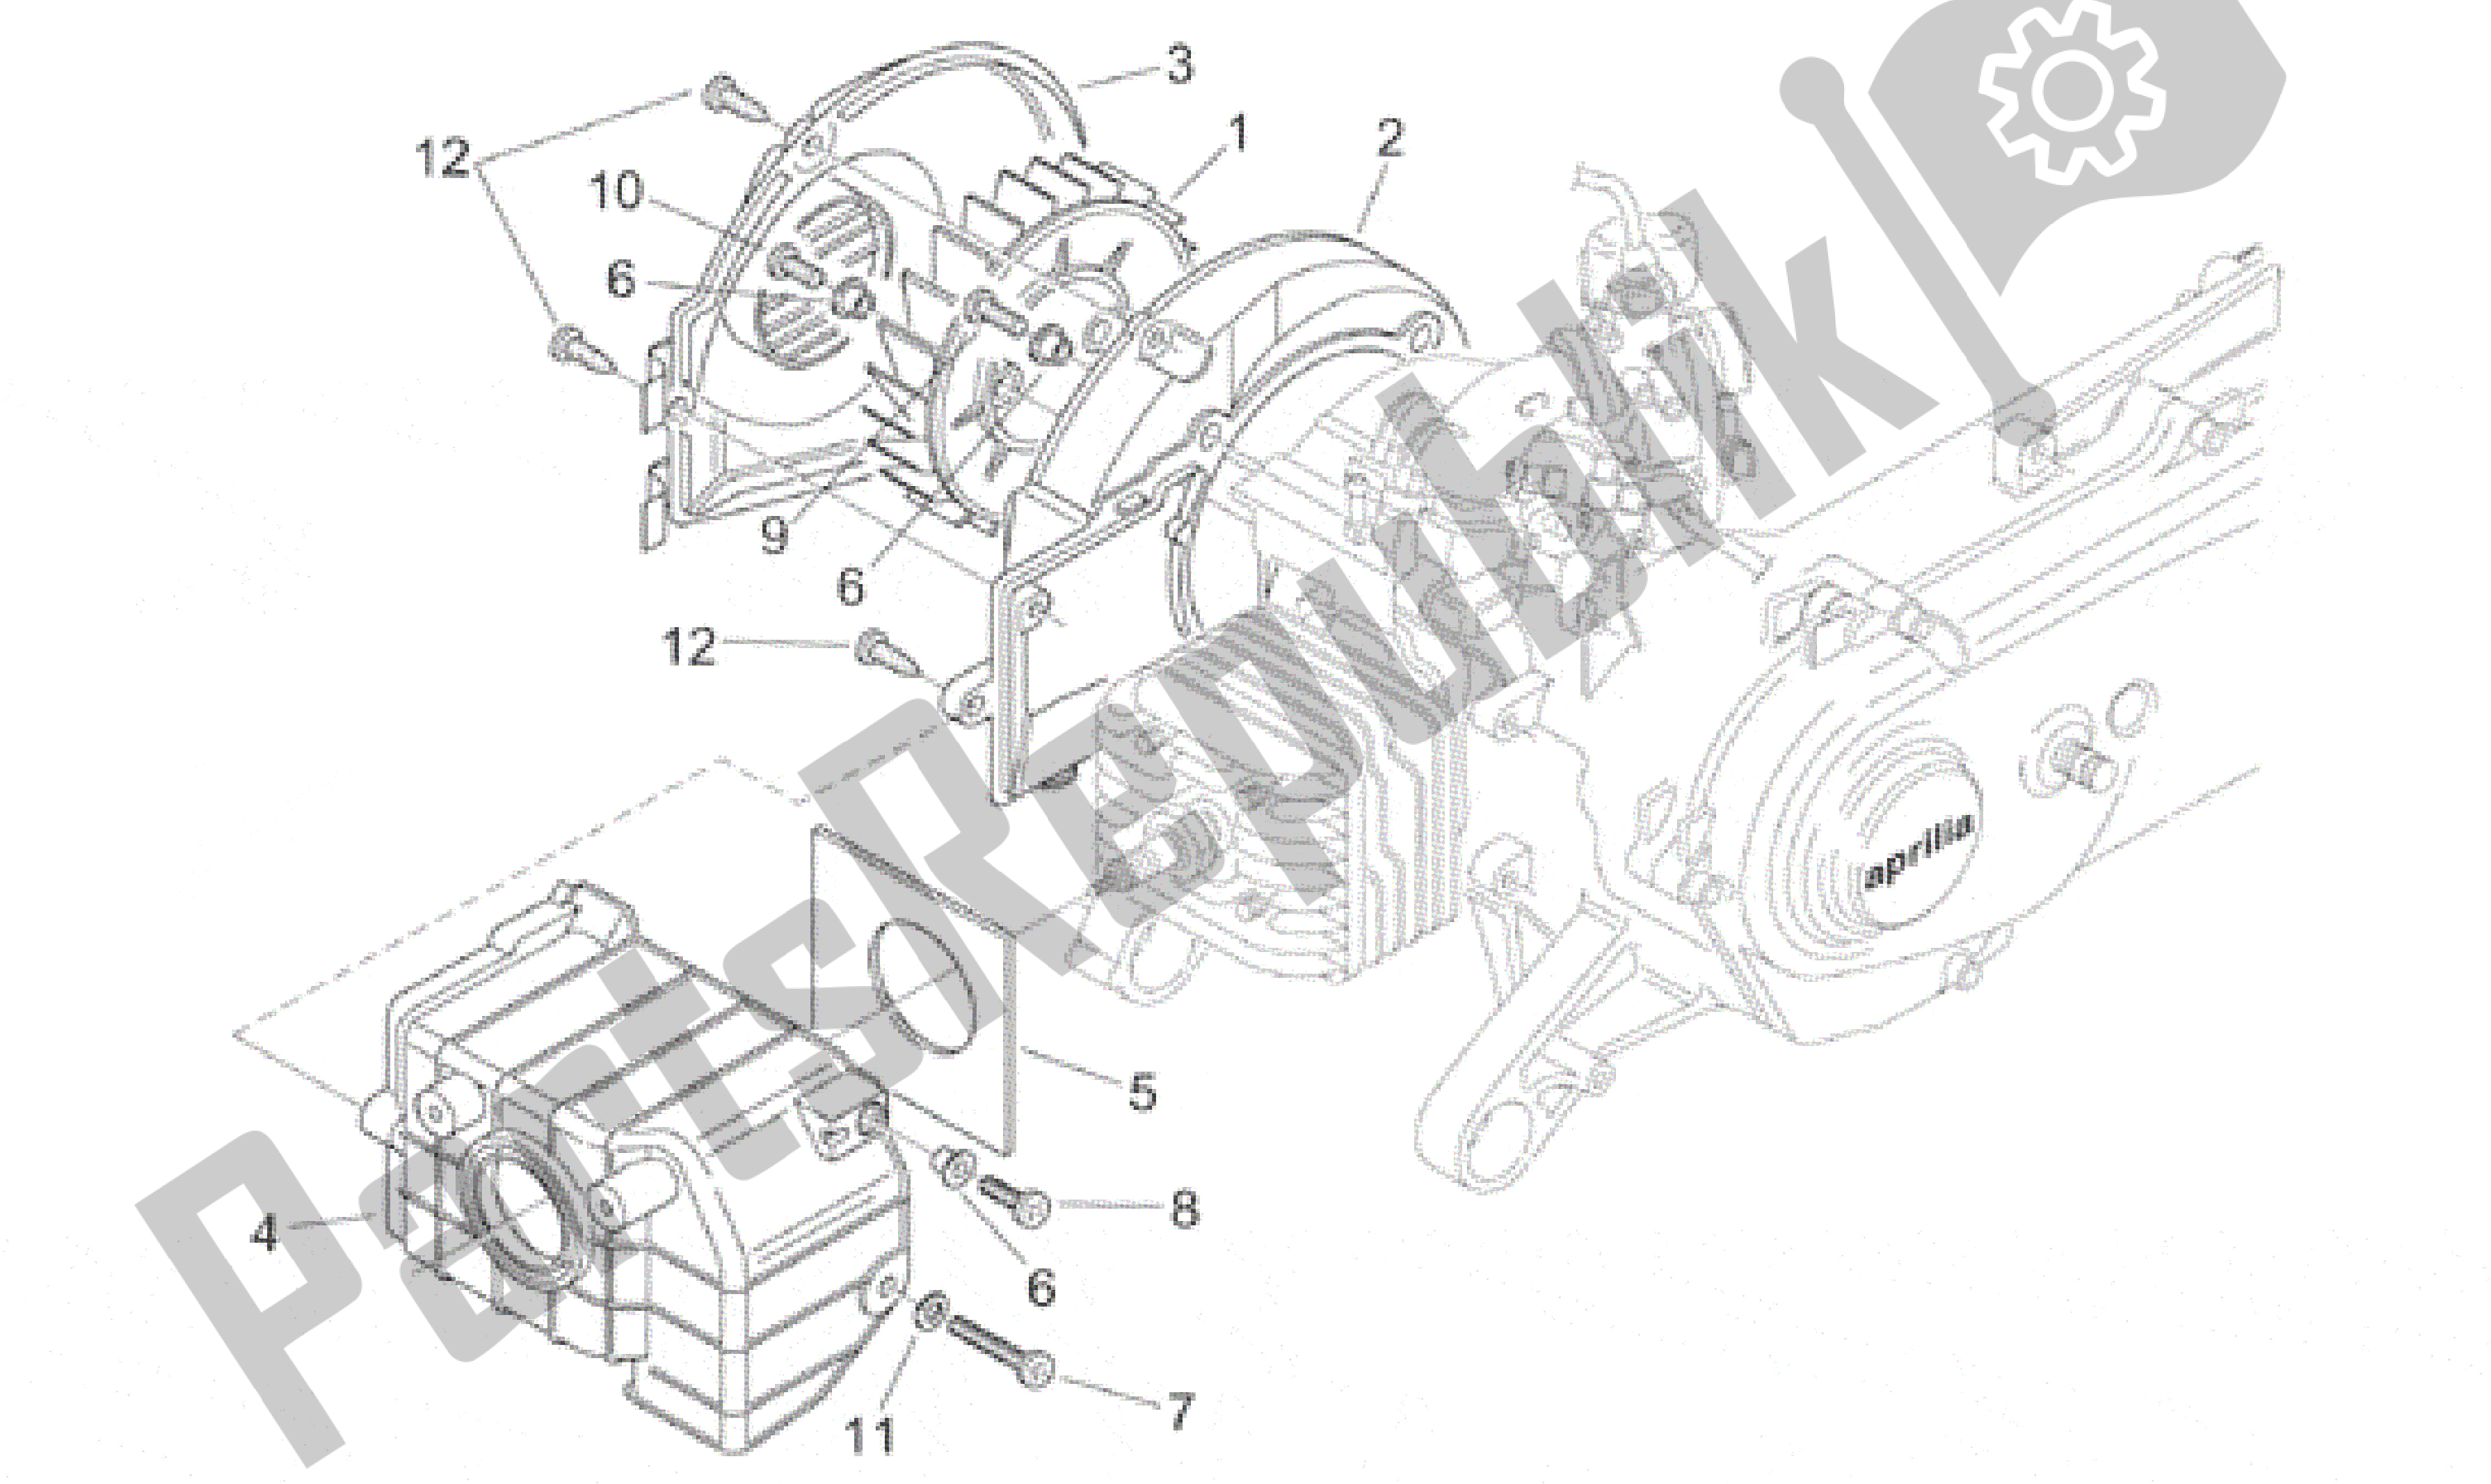 All parts for the Cooling Unit of the Aprilia Habana 50 1999 - 2001